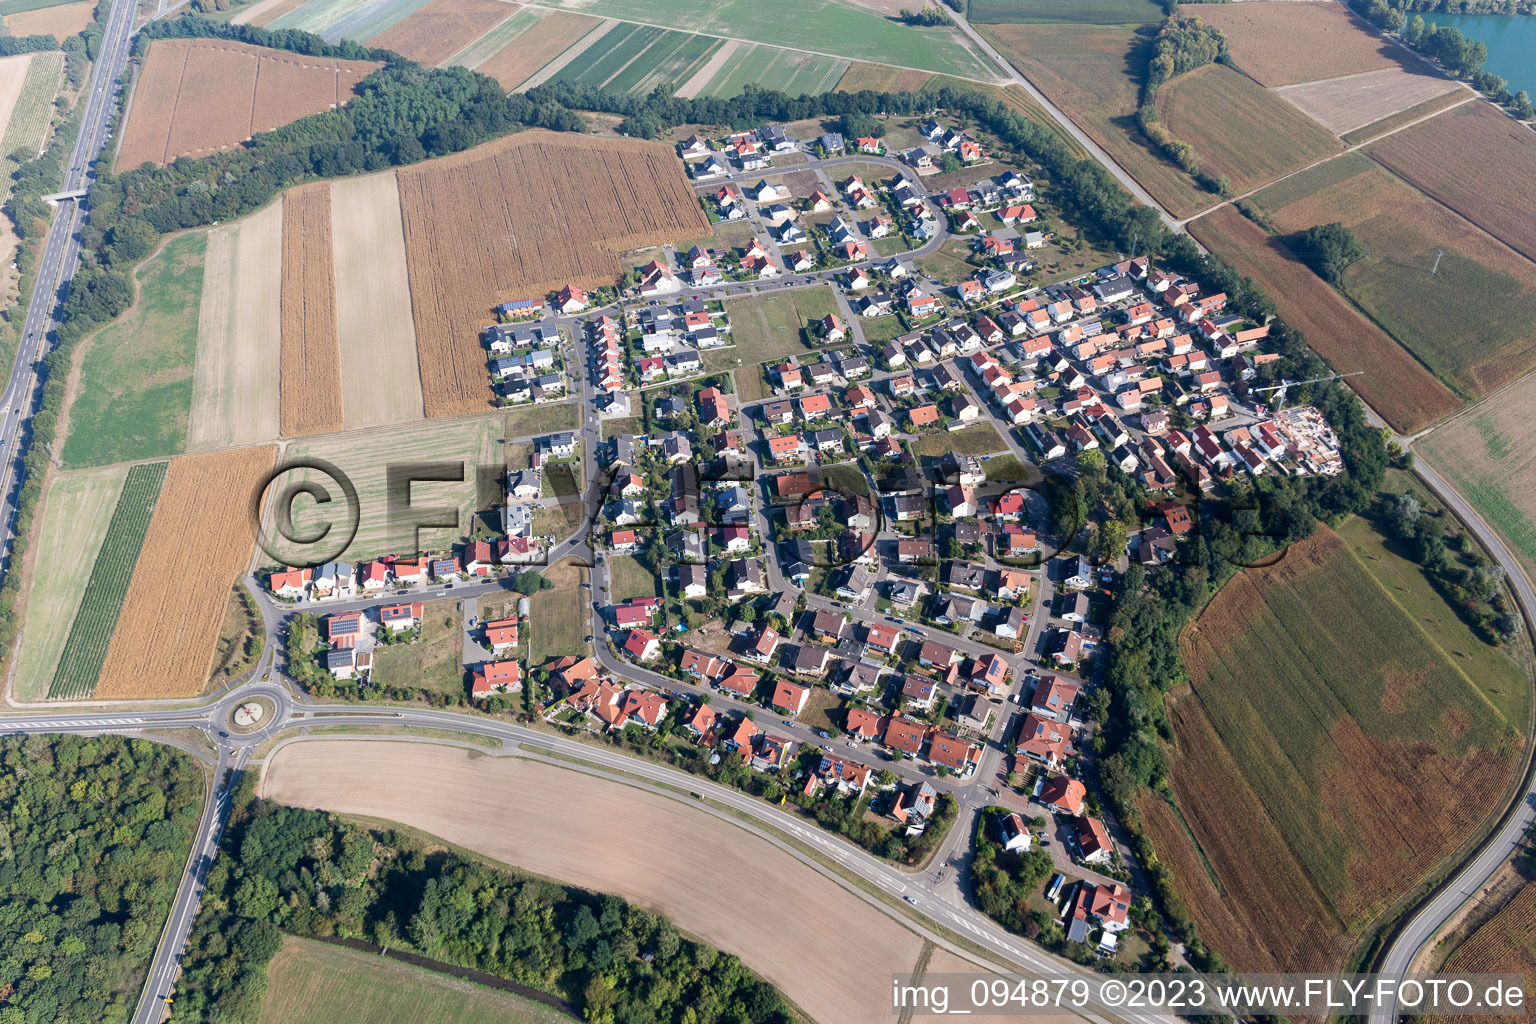 Hardtwald in the state Rhineland-Palatinate, Germany seen from above